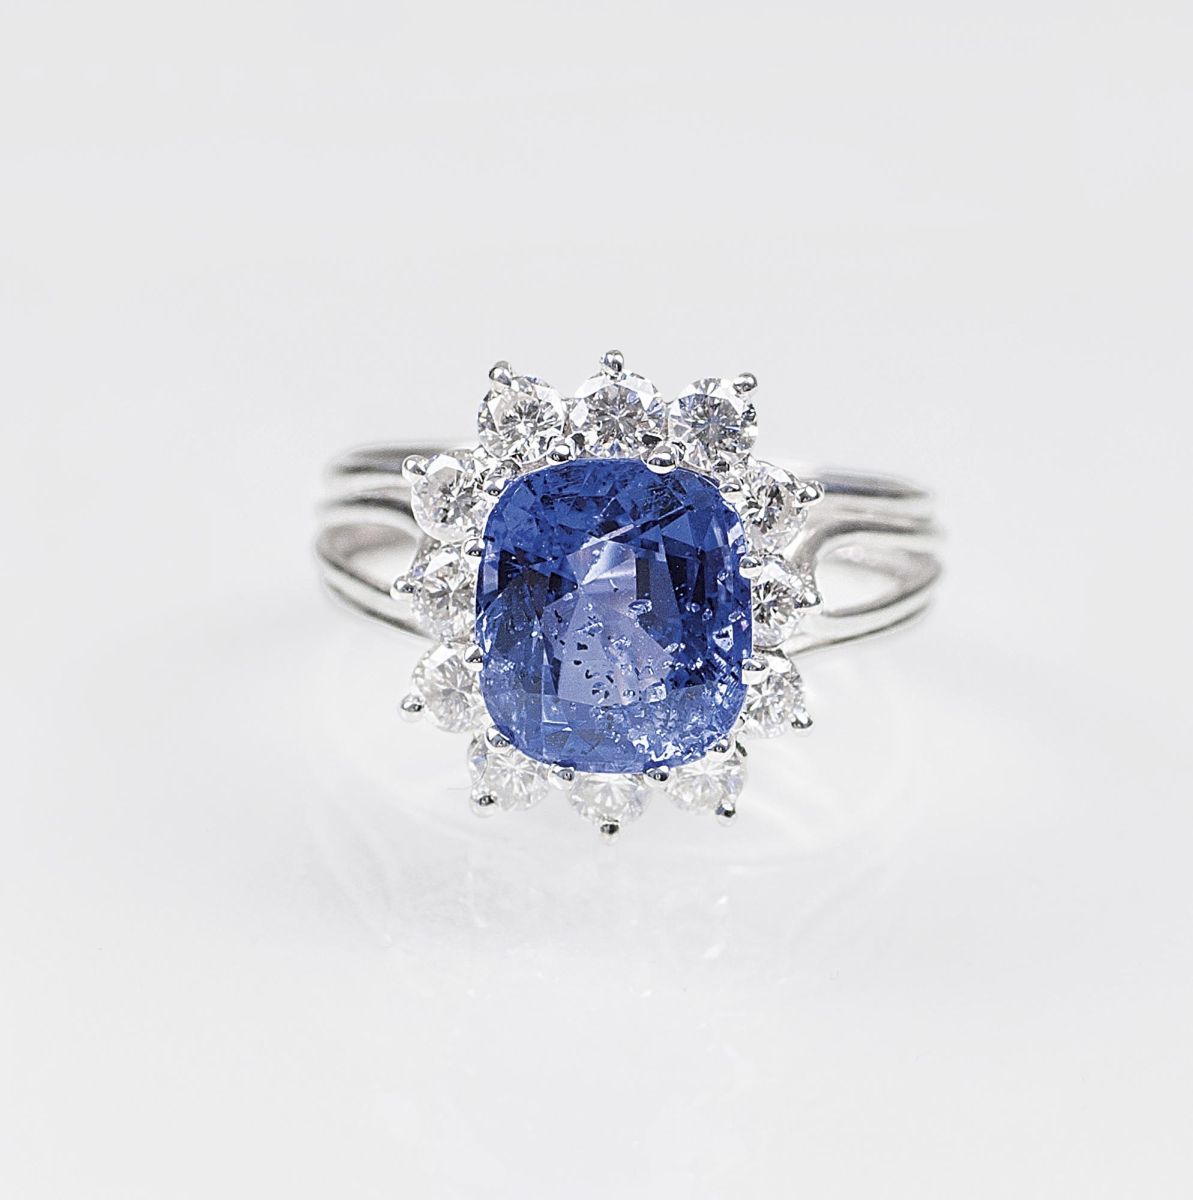 A very fine, natural Sapphire Ring with Diamonds